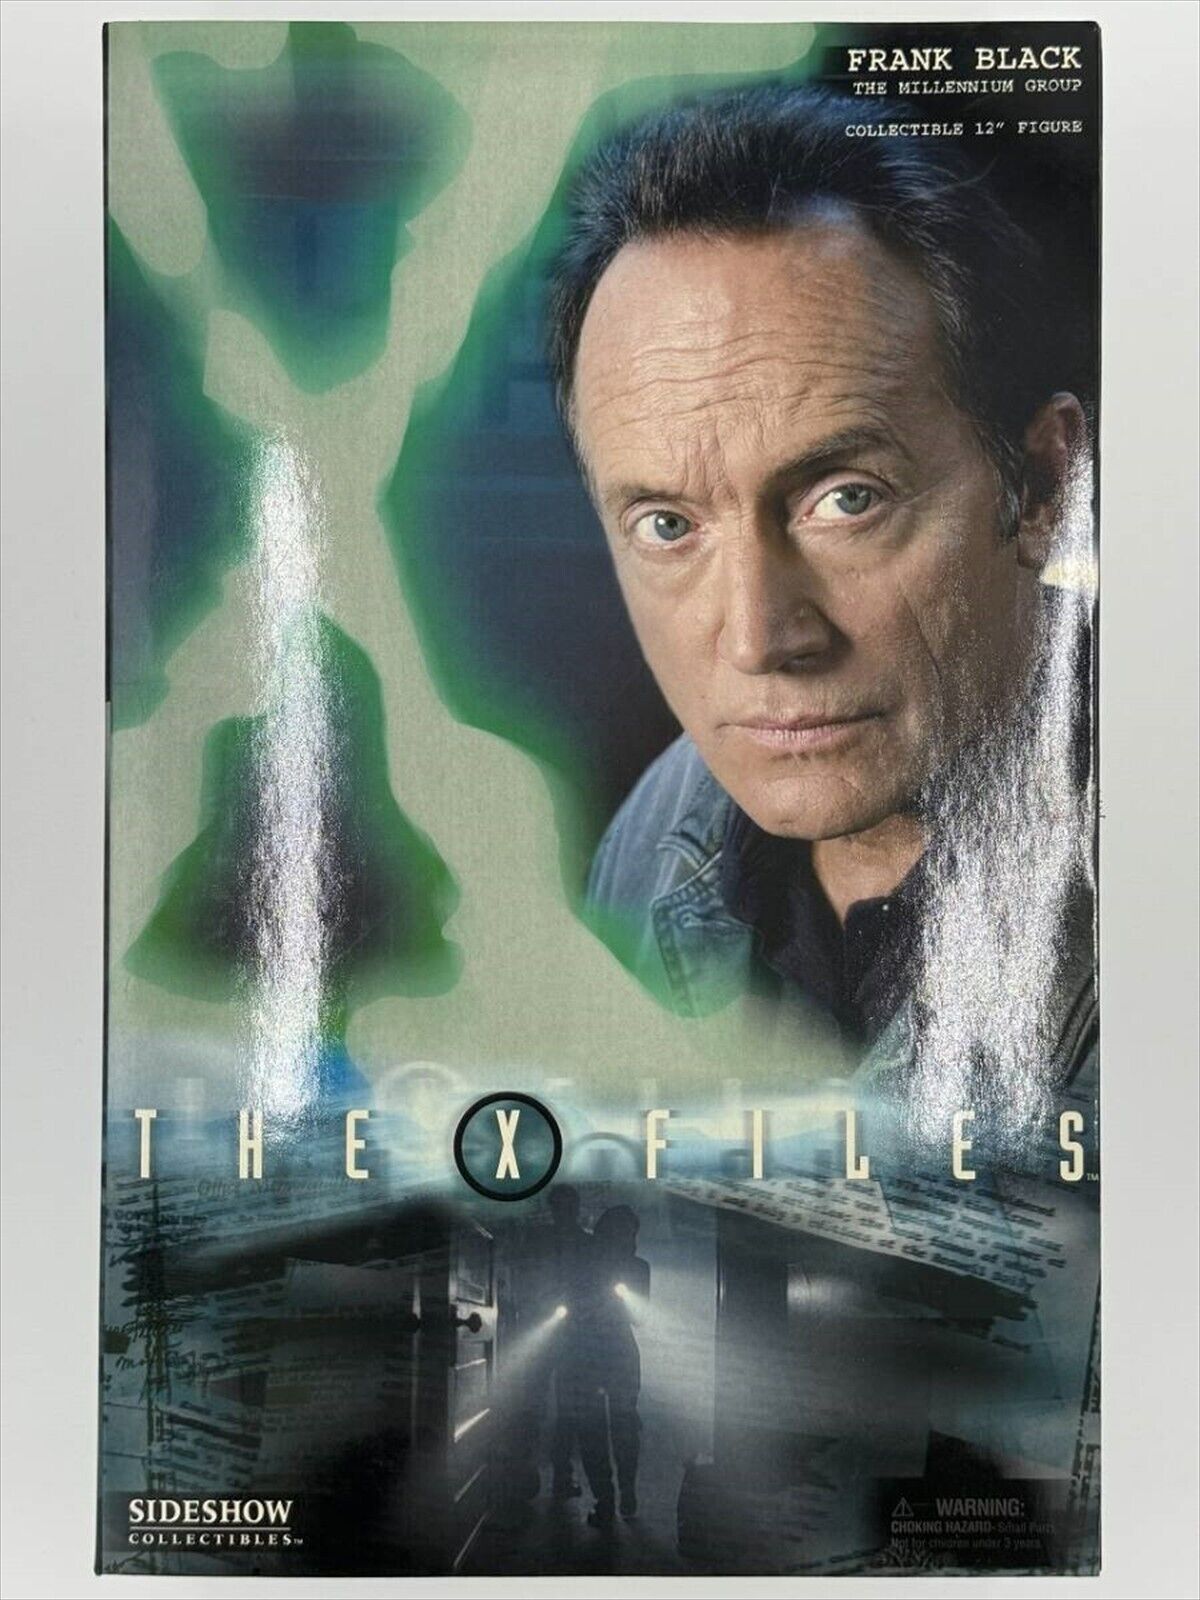 Awesome Sideshow Collectibles The X Files Frank Black Lance Henriksen 1/6 Figure on eBay